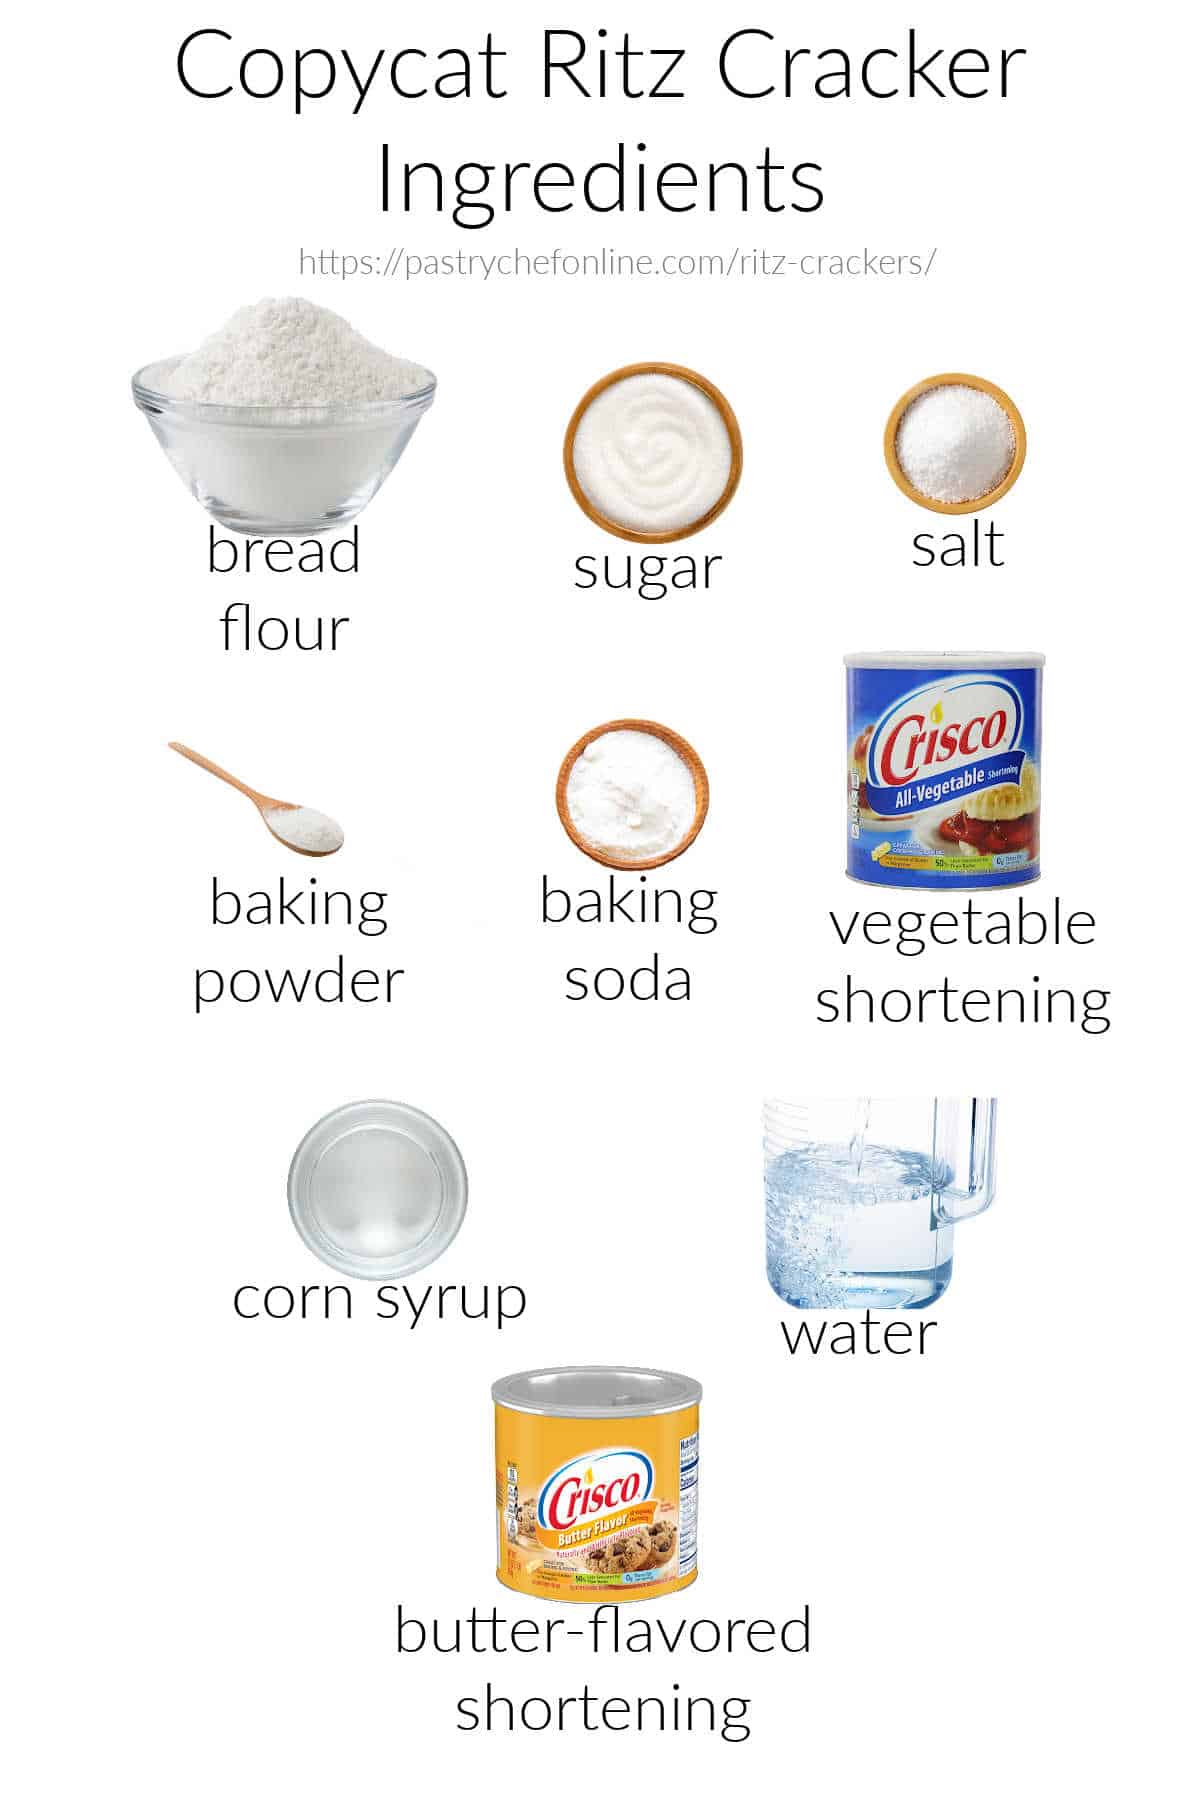 A white background with full-color images of the ingredients needed to make Ritz crackers, labeled and arrounded to fill the space. Title text reads, "Copycat Ritz Cracker Ingredients," and the pictured ingredients are bread flour, sugar, salt, baking powder, baking soda, vegetable shortening, corn syrup, water, and butter-flavored shortening.